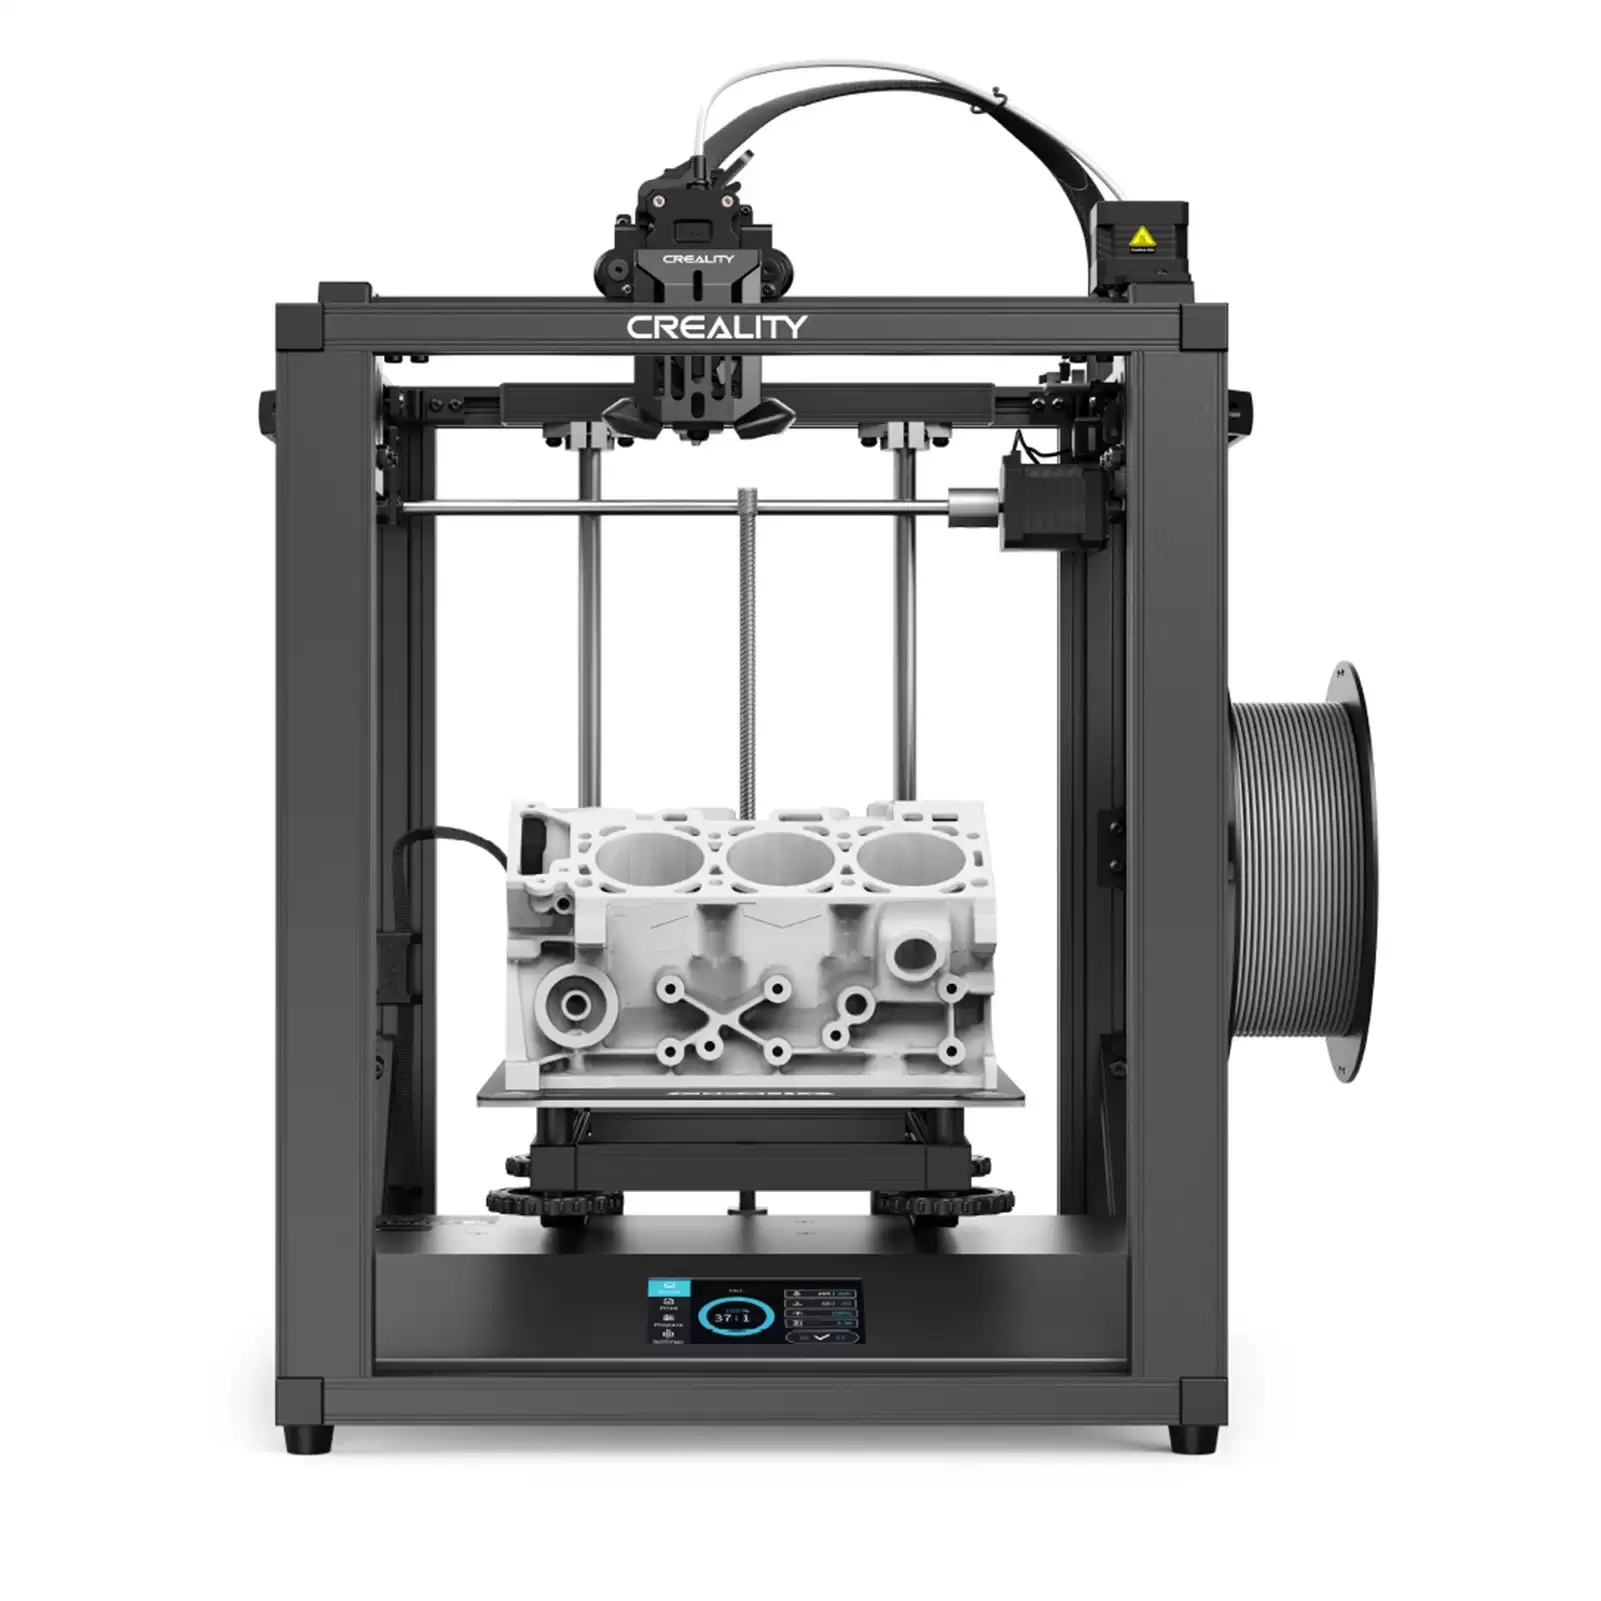 Spend $406.87 Creality Ender 5 S1 3d Printer With This Cafago Discount Voucher